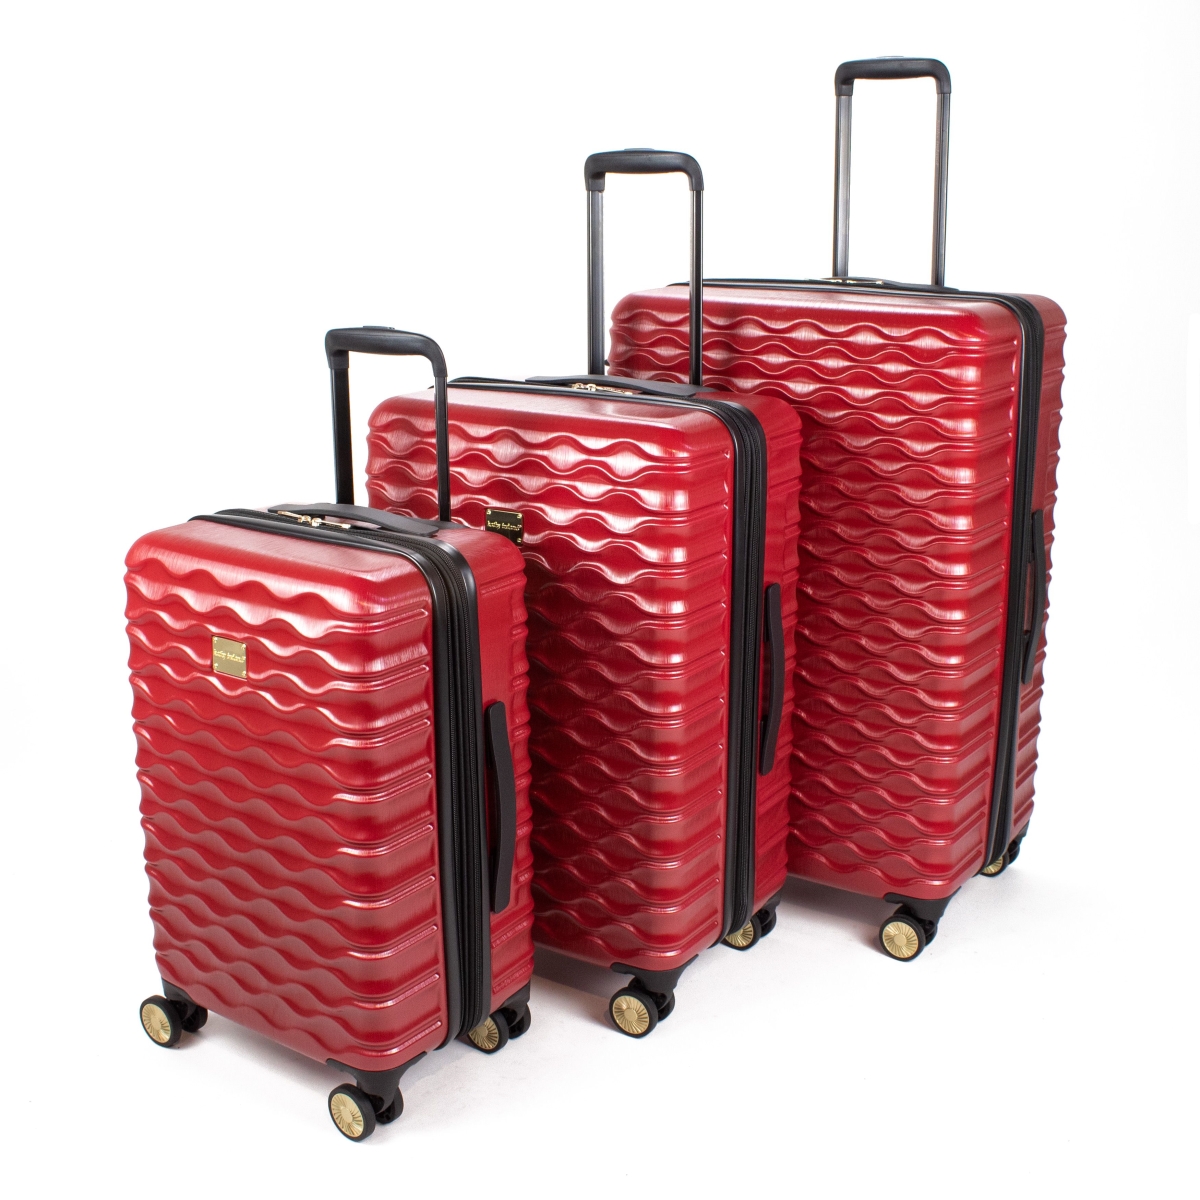 Picture of Kathy Ireland KI115-ST3-RED Maisy Hardside Spinner Luggage Set, Red - 3 Piece